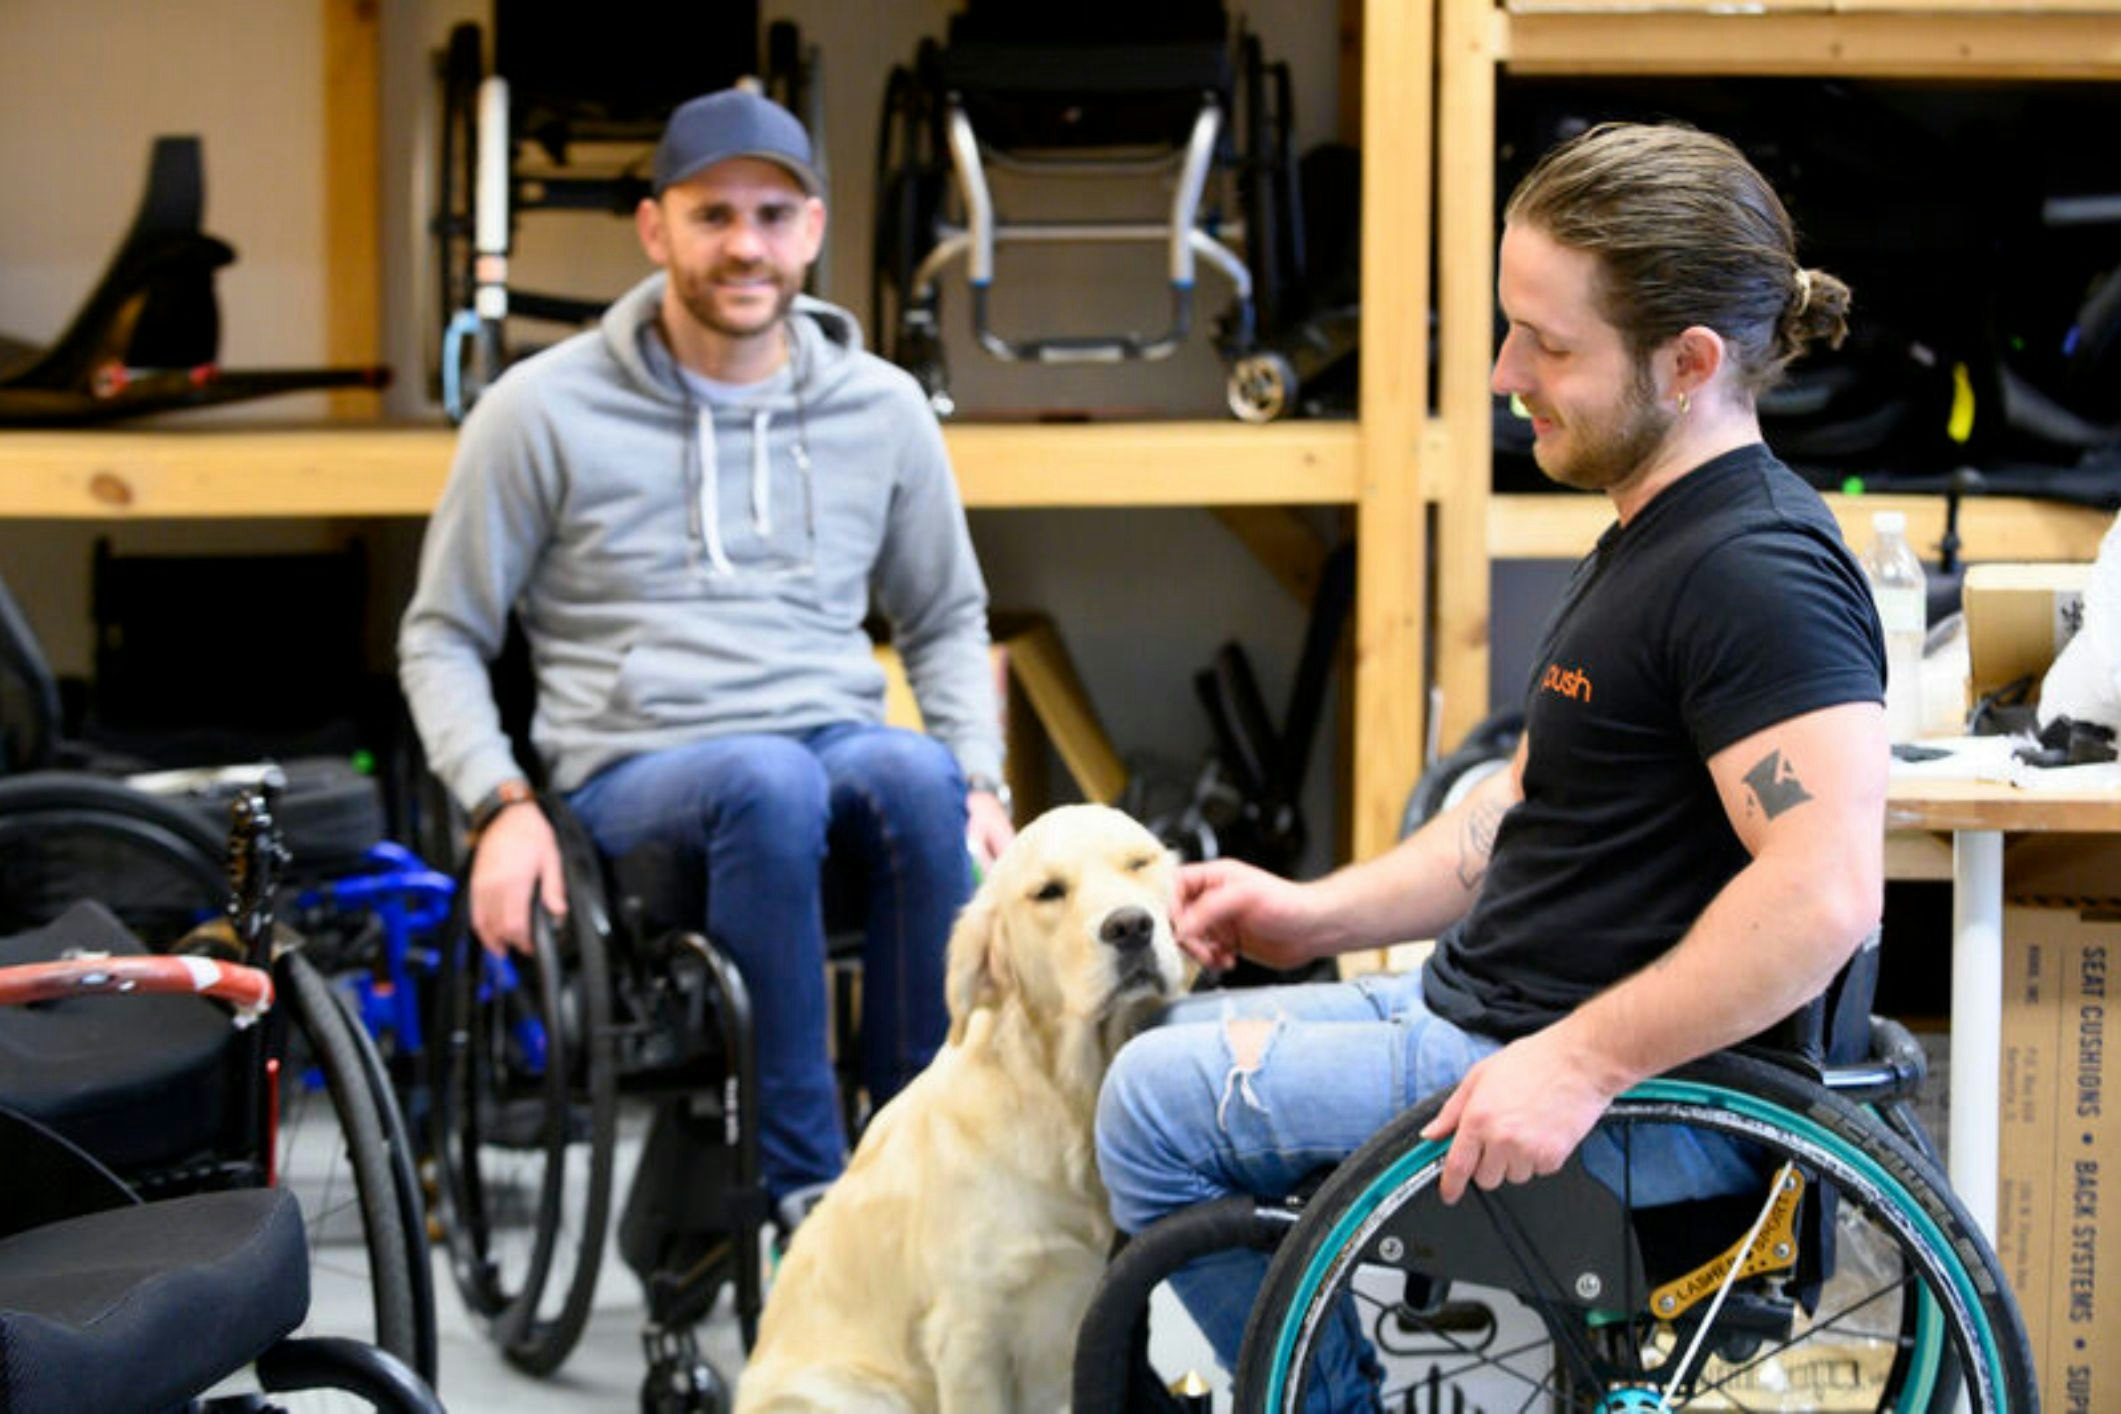 <p>Confession Port Adelaide, Co-able and the upcoming launch of an accessible gym are transforming the way people experience life in Adelaide’s western suburbs. [Source: Supplied]</p>
